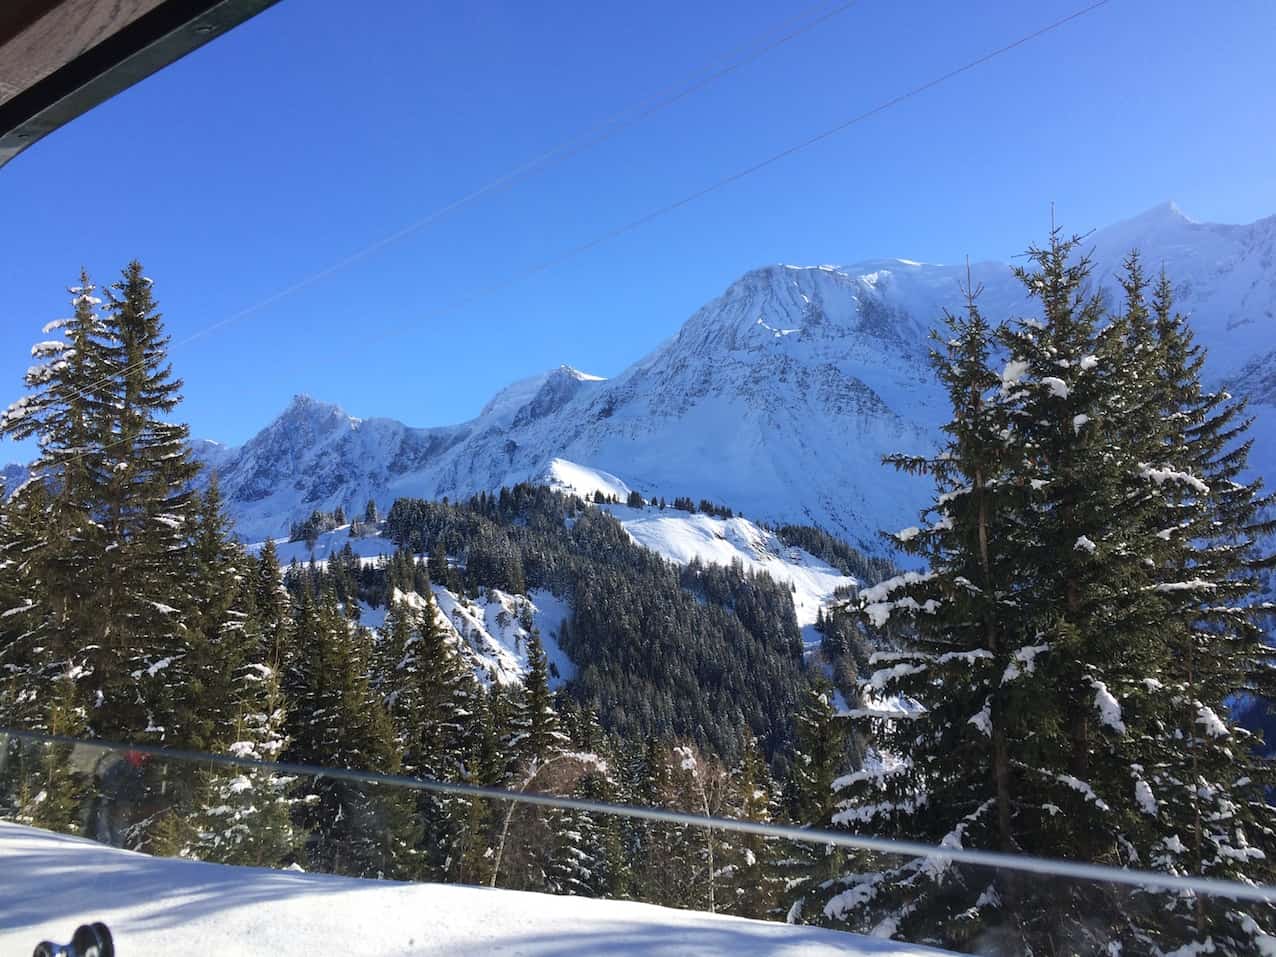 Mont Blanc Tramway to Les Houches, Chamonix for non skiers